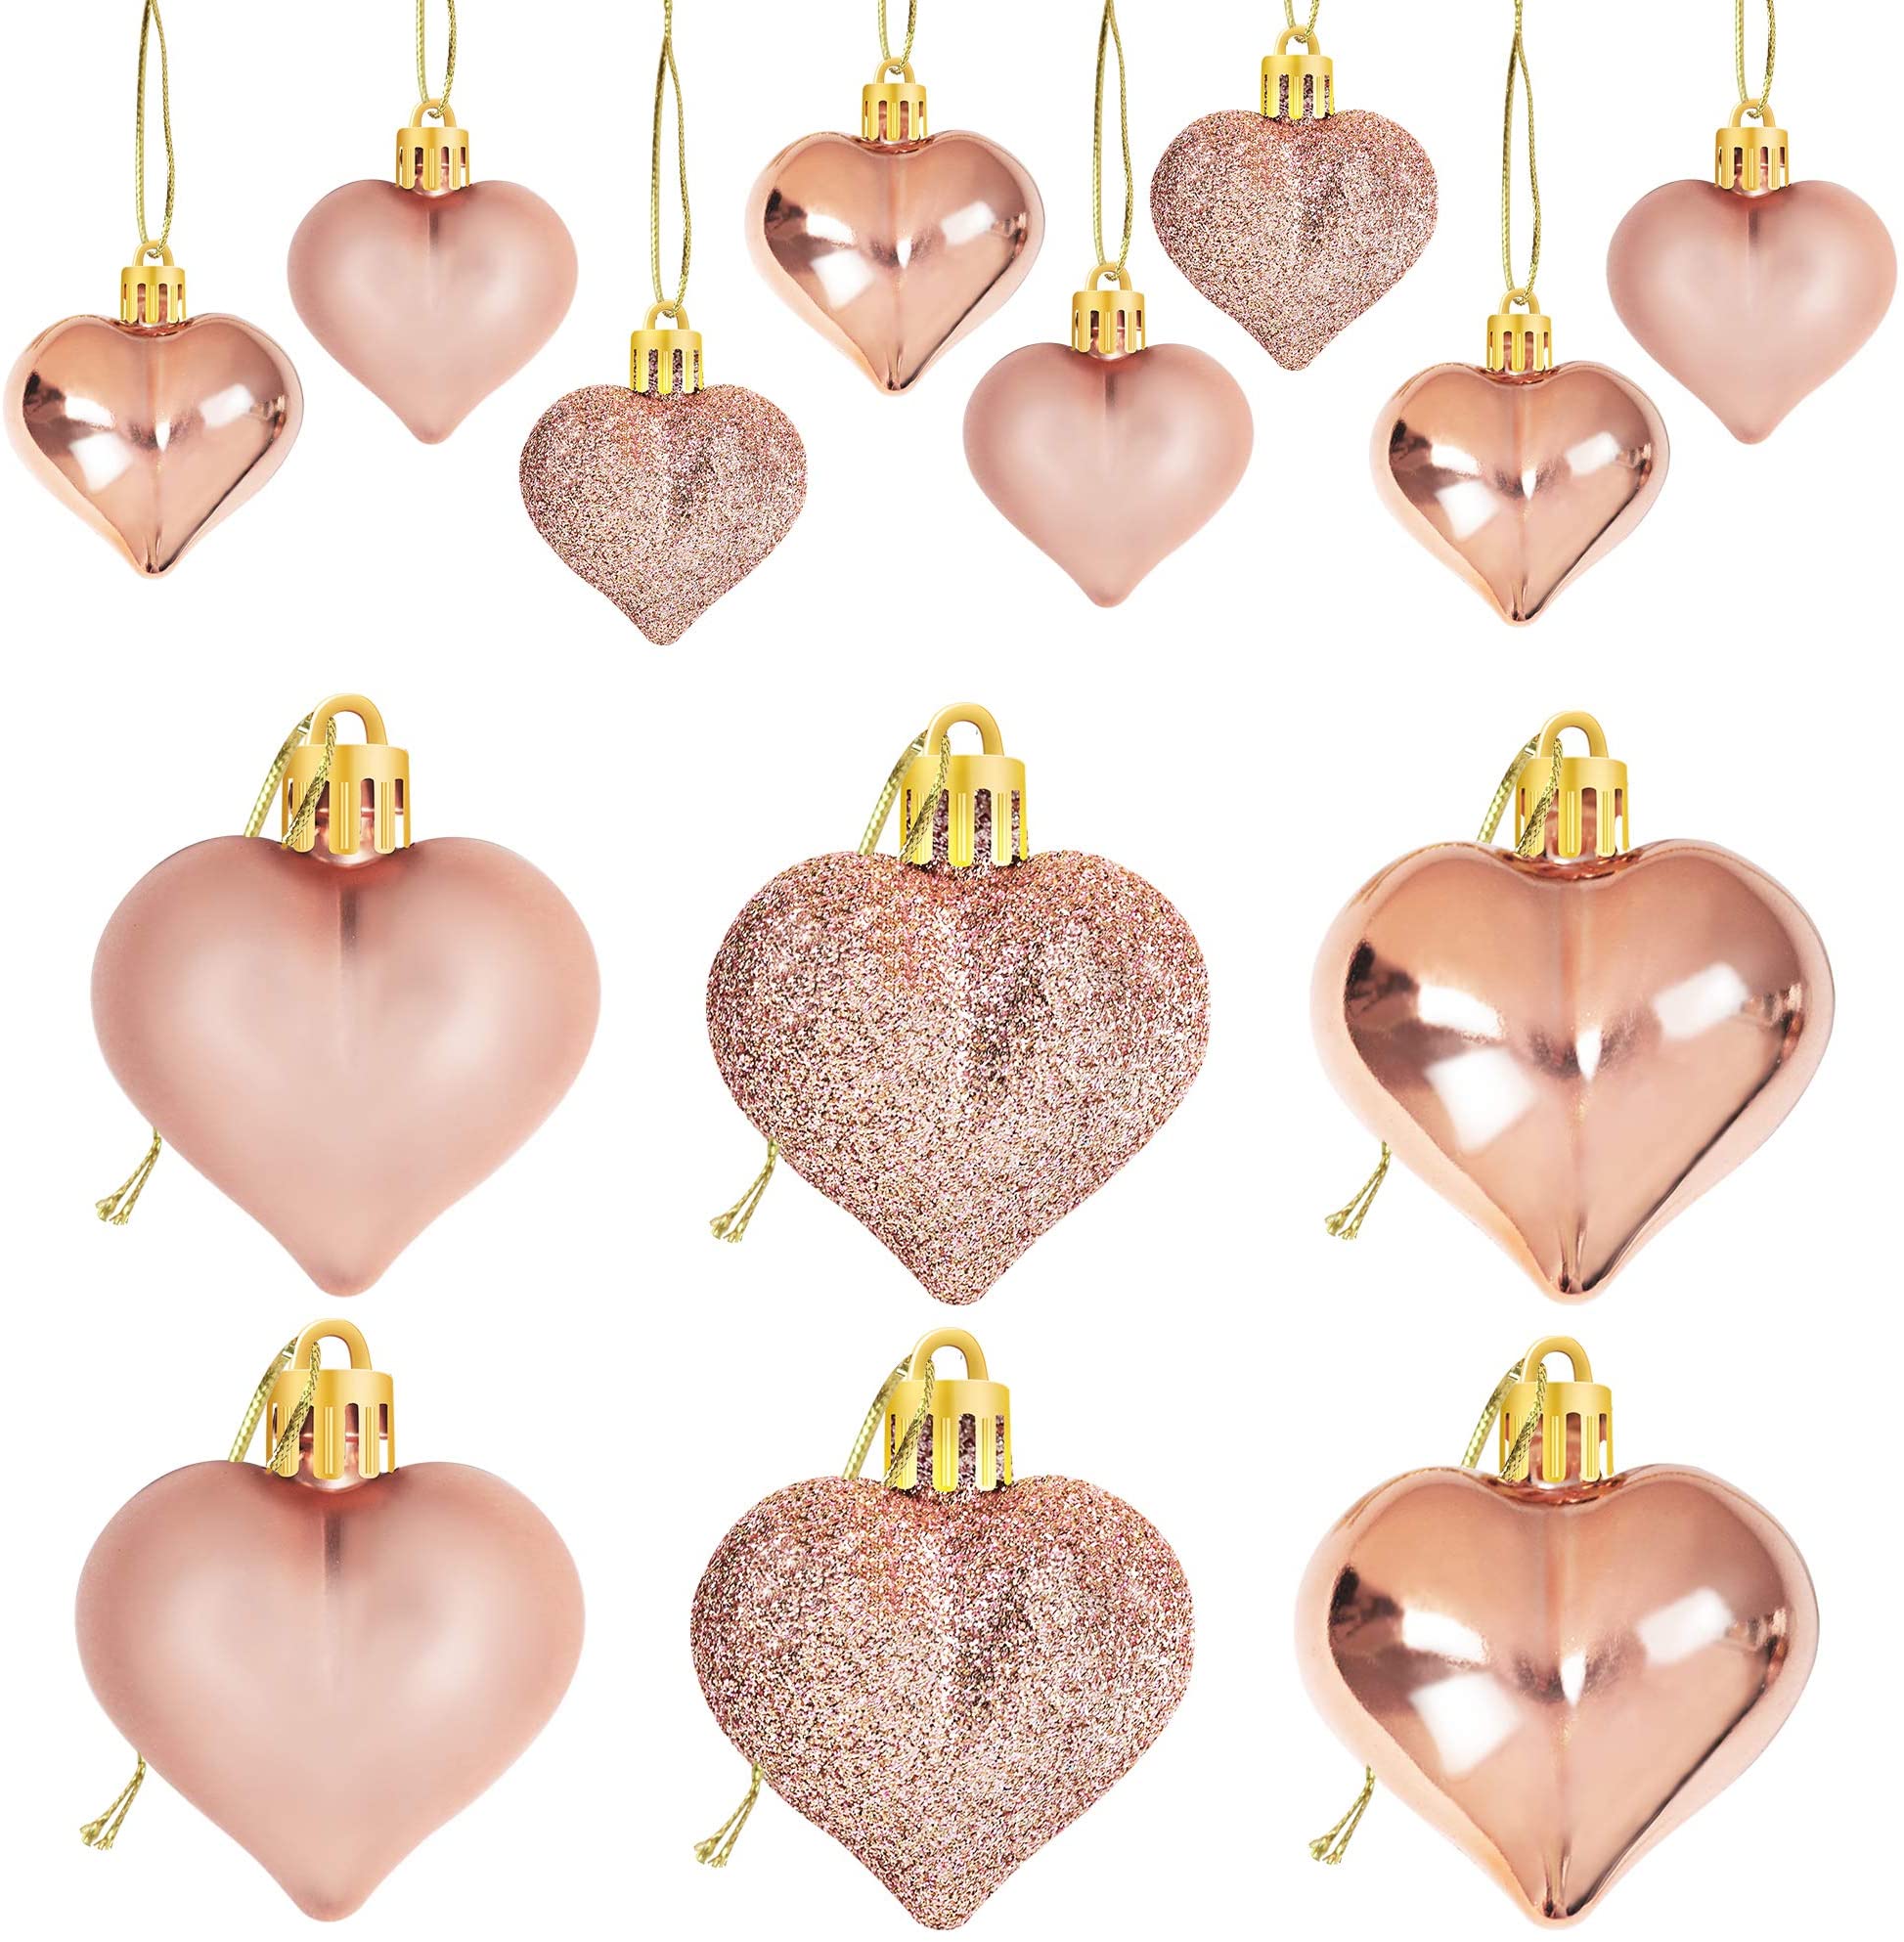 Wedding Haning Ornaments for Decorations, LONGRV 24Pcs Valentine's Day  Heart Shaped Ornaments | Romantic Valentines Heart Decorations | Glossy  Matt